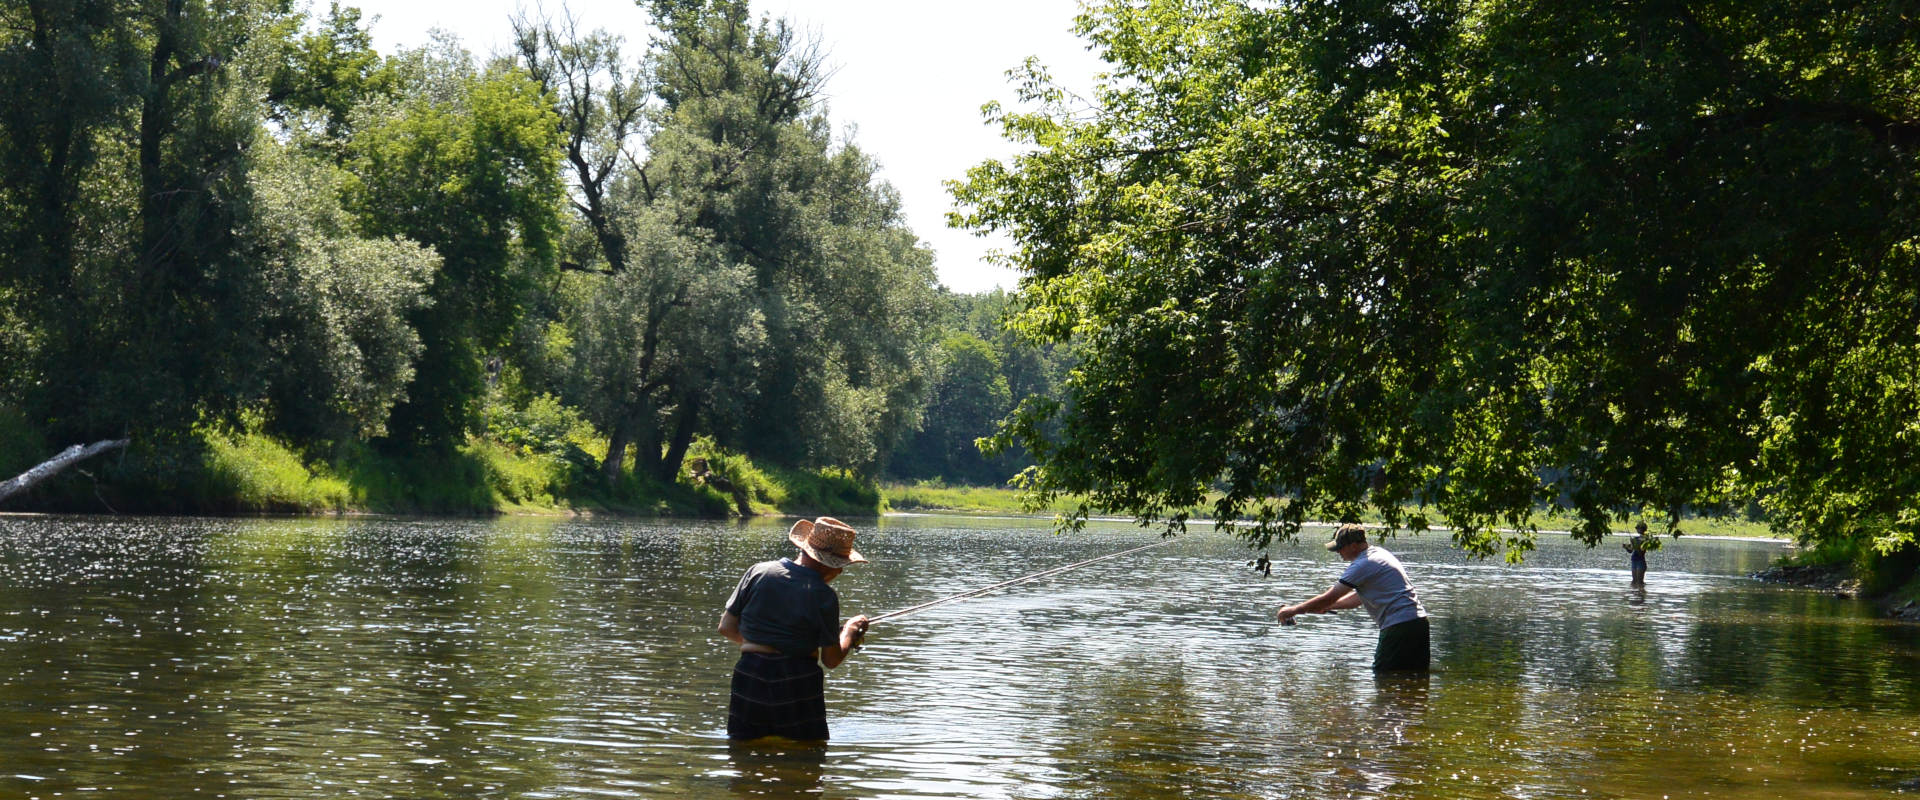 Grand River Fishing Trips learn to fish lesson in Ontario